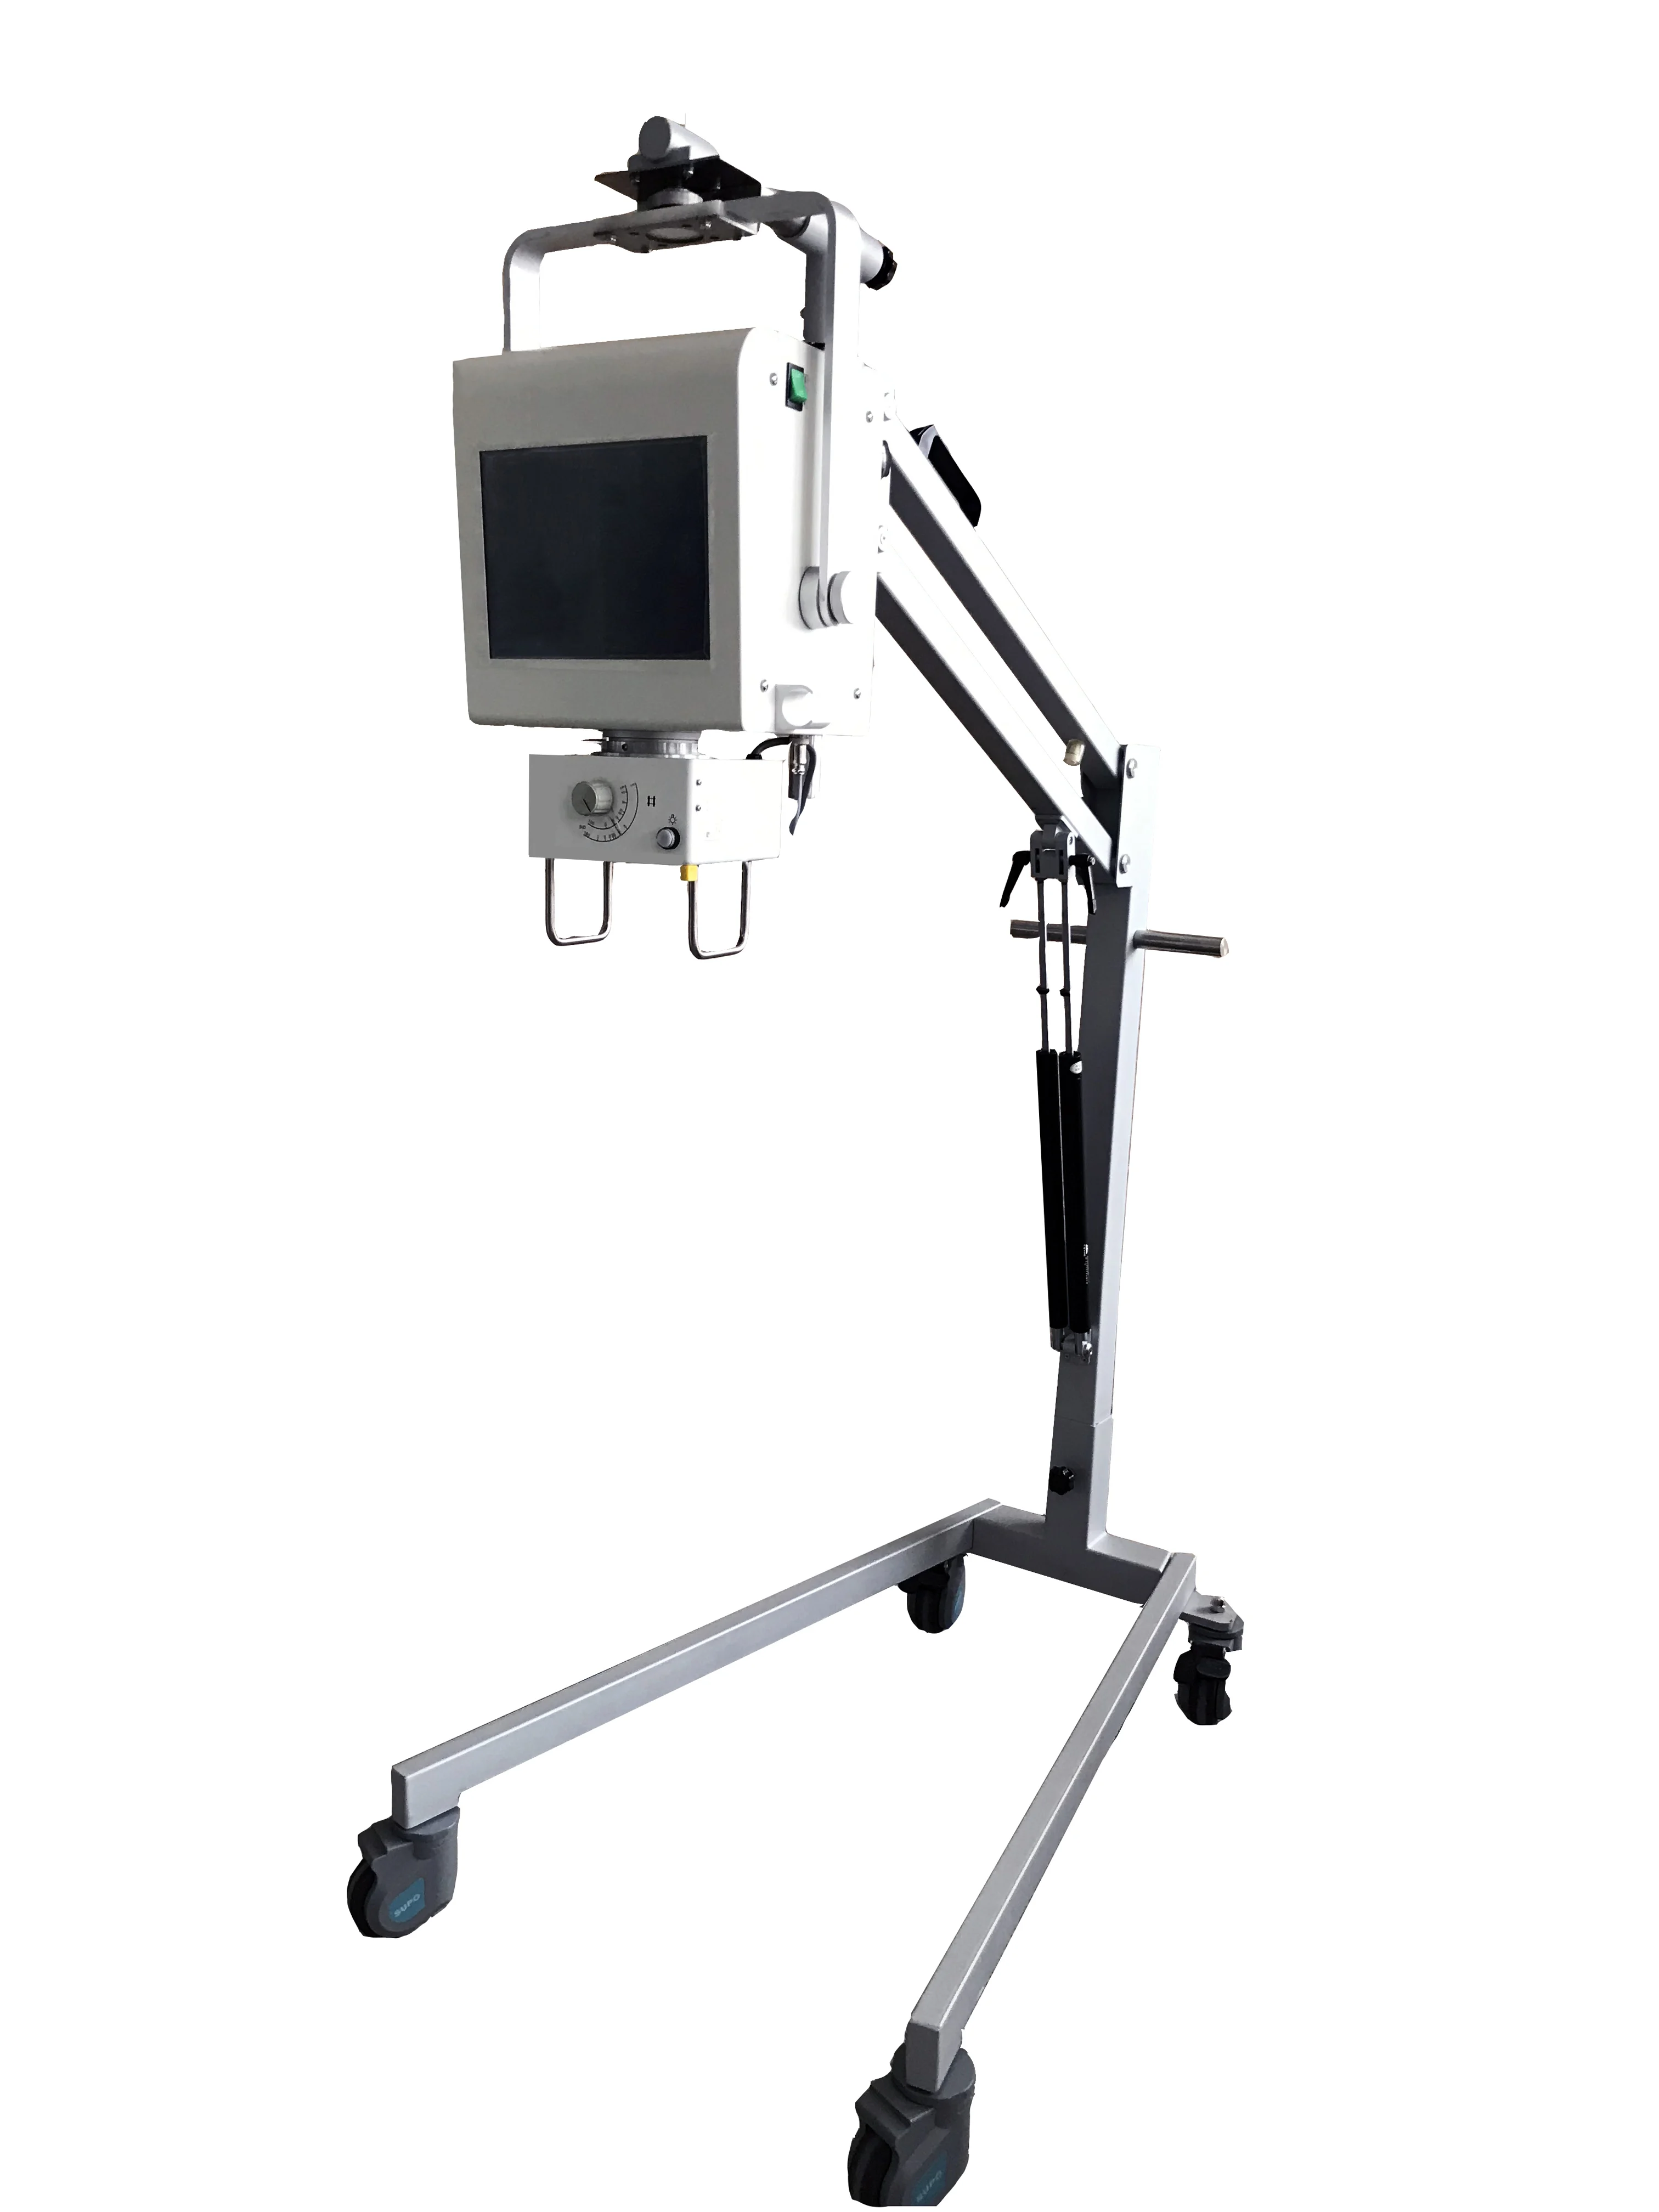 
High efficiency china x-ray machine portable x ray machine price in rupees 